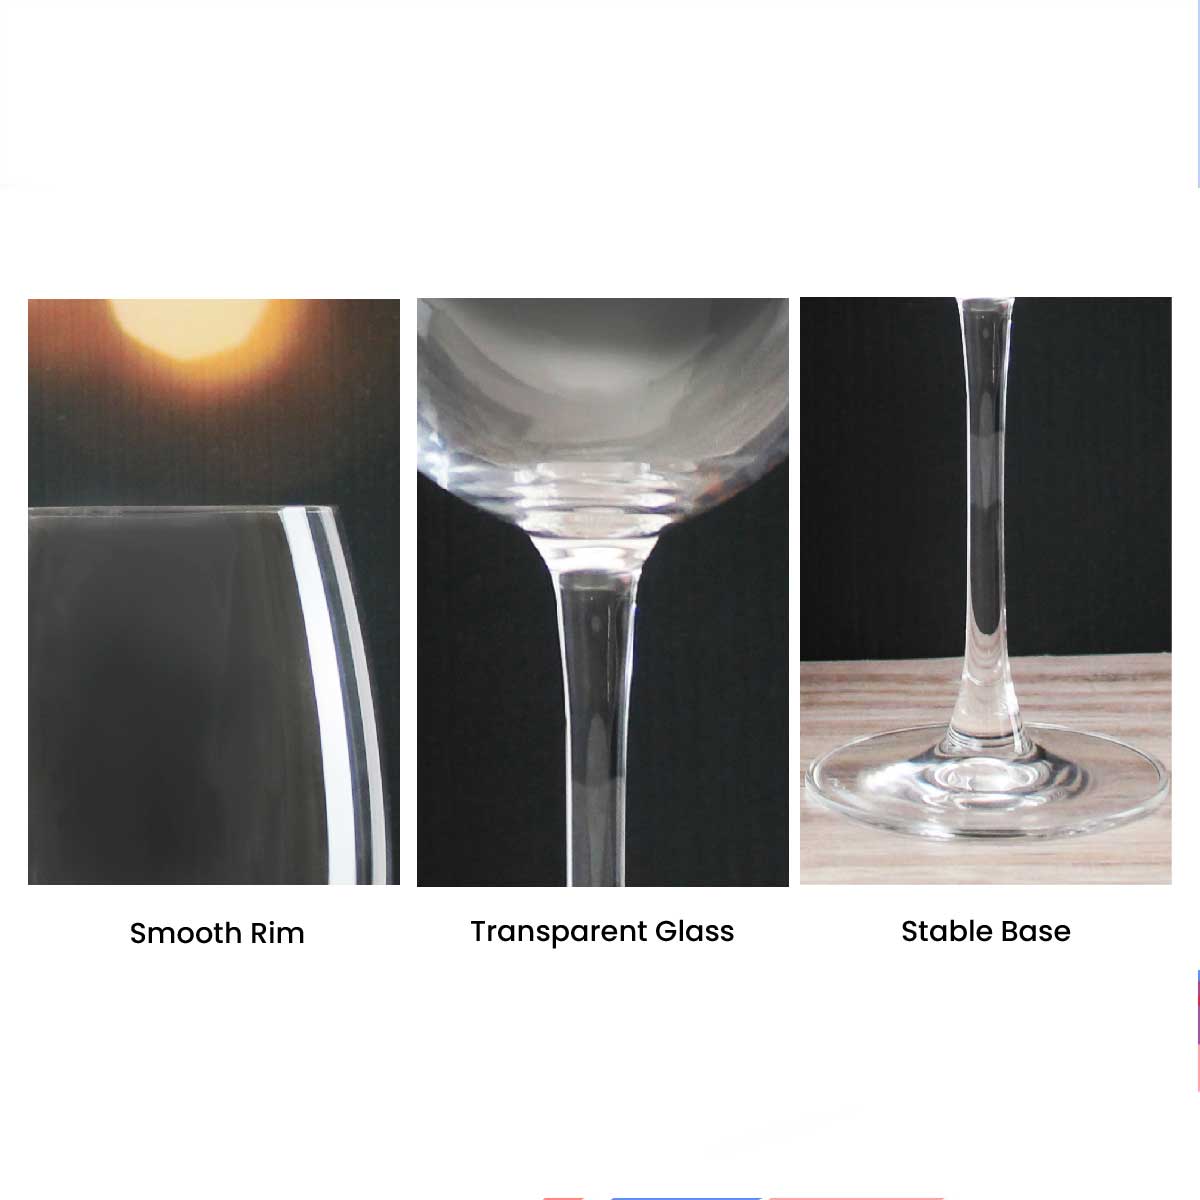 Engraved Giant Wine Glass, Can Hold 1 Bottle of Wine Image 4